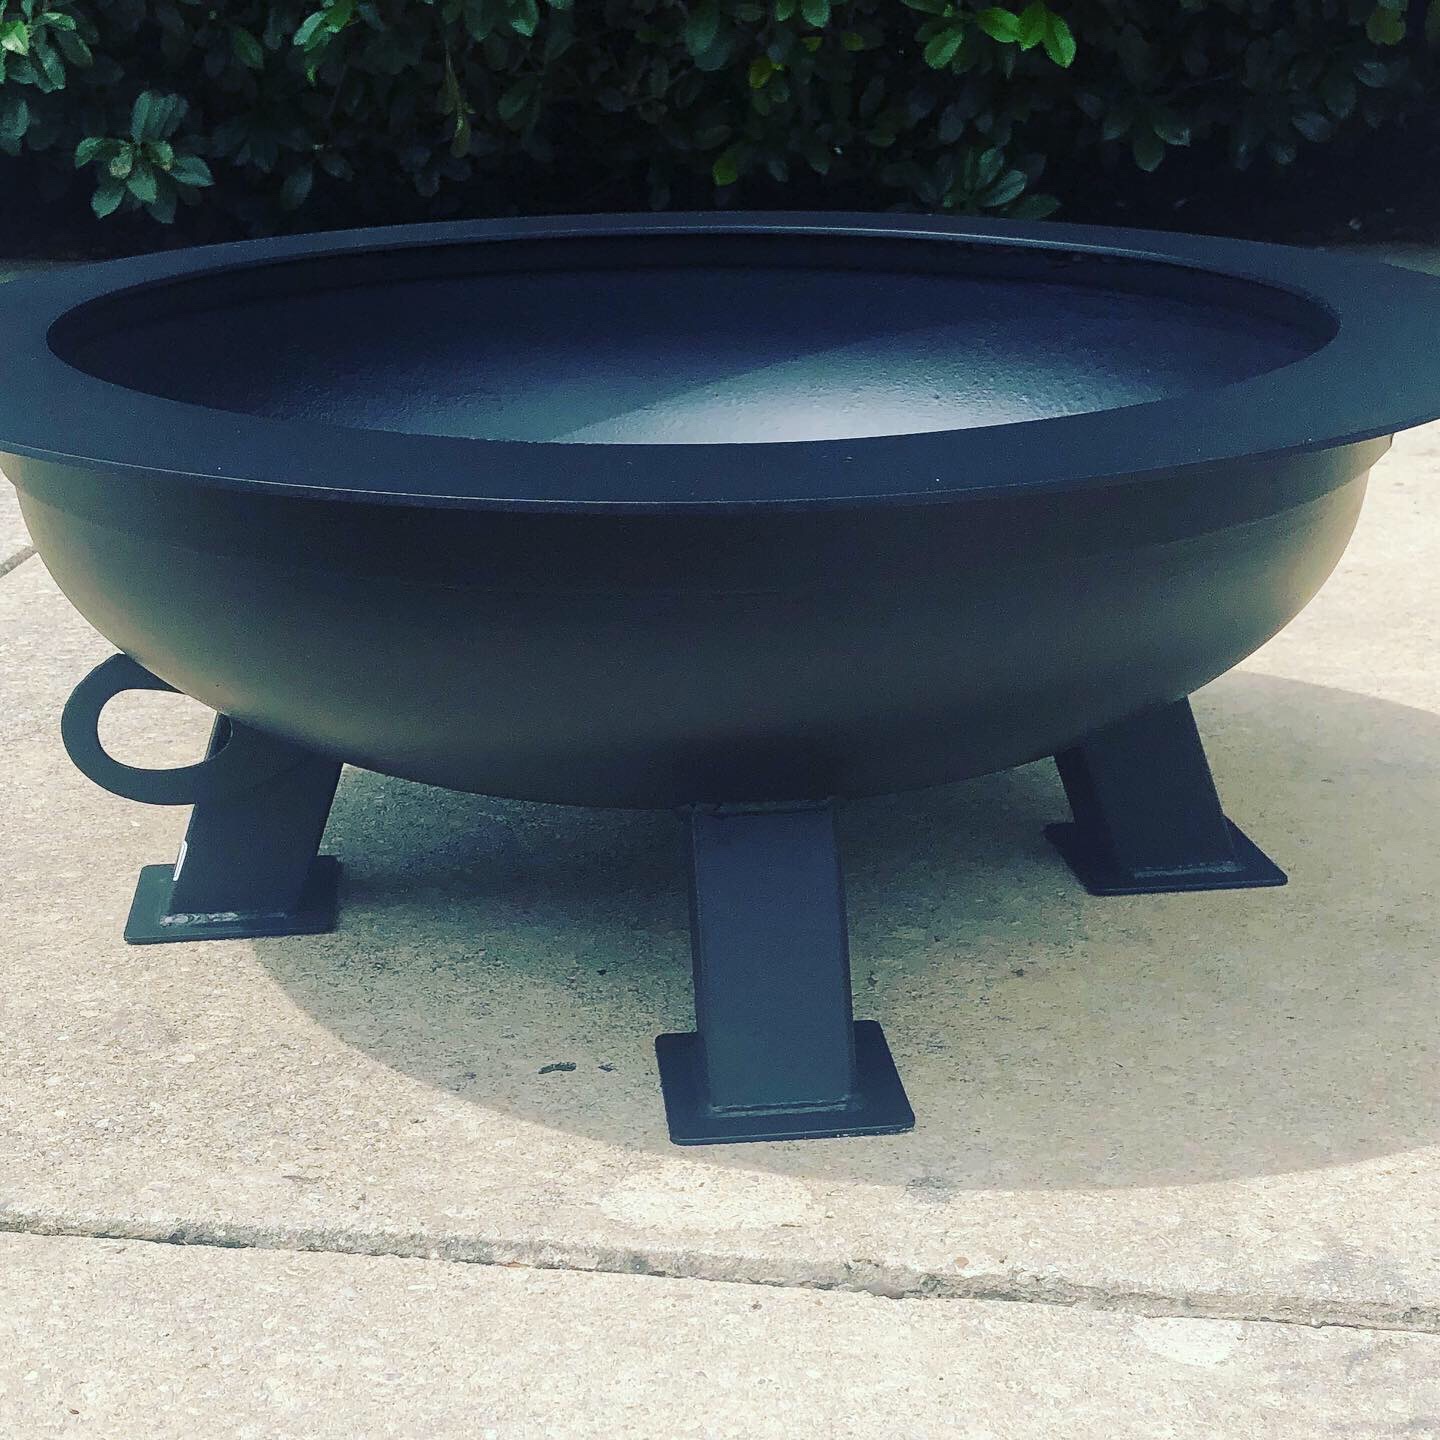 Sherman 30 Round Fire Pit Steel, Metal Fire Pits Texas